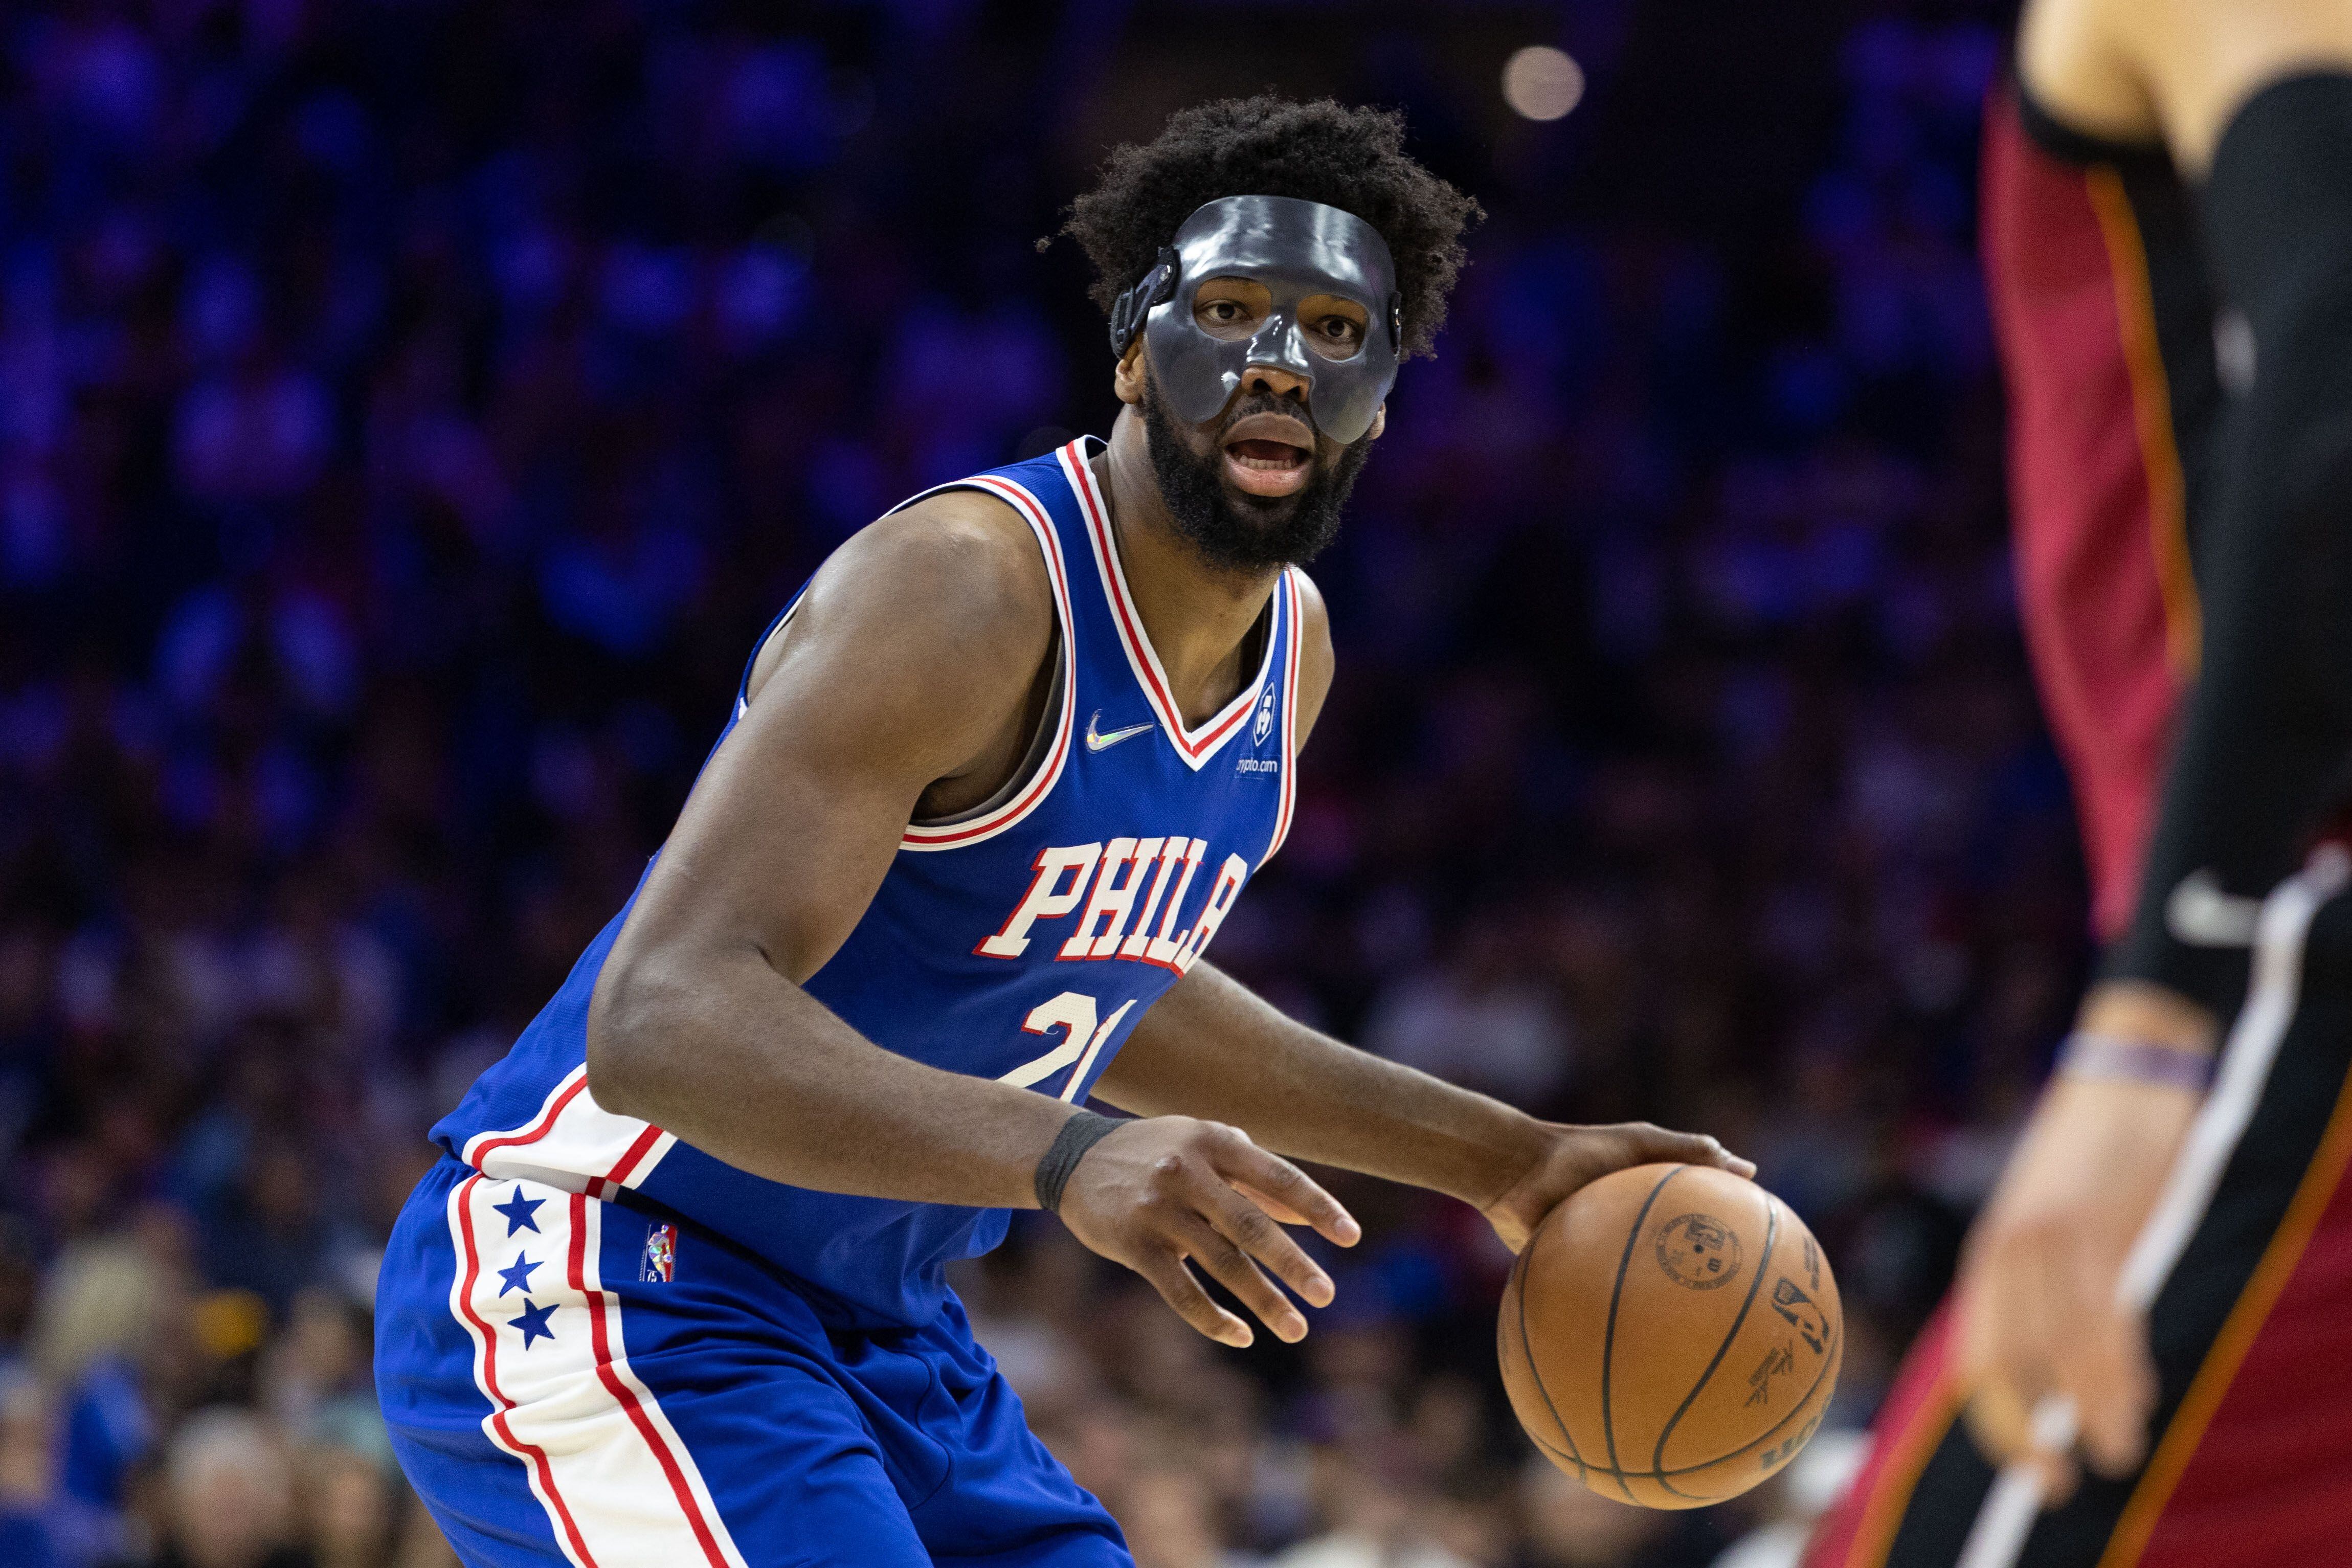 May 12, 2022; Philadelphia, Pennsylvania, USA; Philadelphia 76ers center Joel Embiid (21) dribbles the ball against the Miami Heat during the third quarter in game six of the second round of the 2022 NBA playoffs at Wells Fargo Center. Mandatory Credit: Bill Streicher-USA TODAY Sports